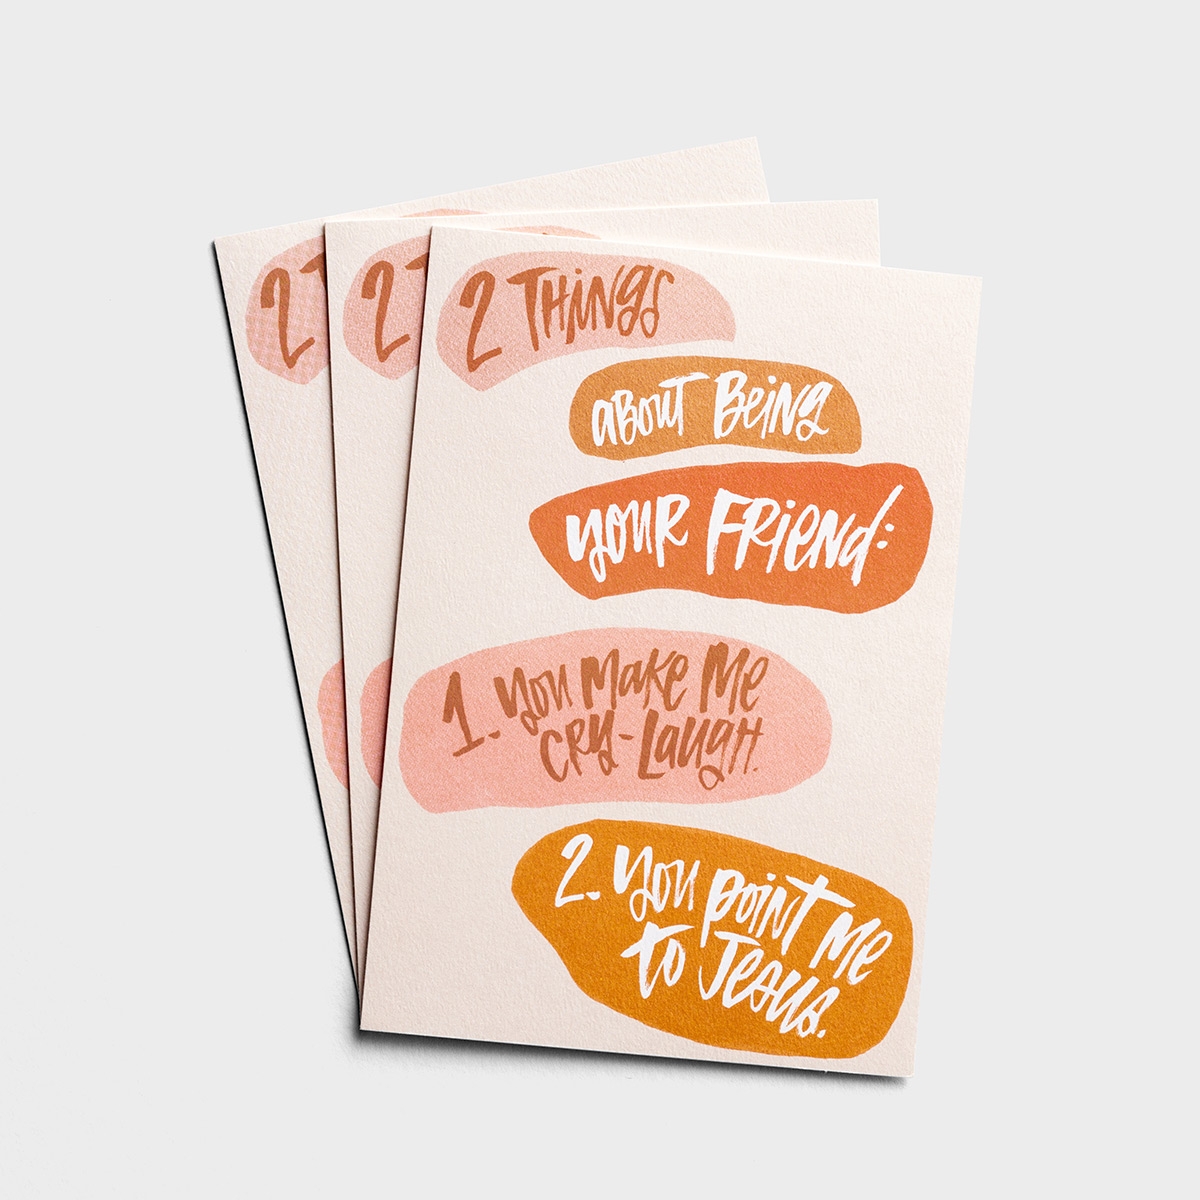 Katygirl - Friendship - 2 Things About Being Your Friend - 3 Premium Cards